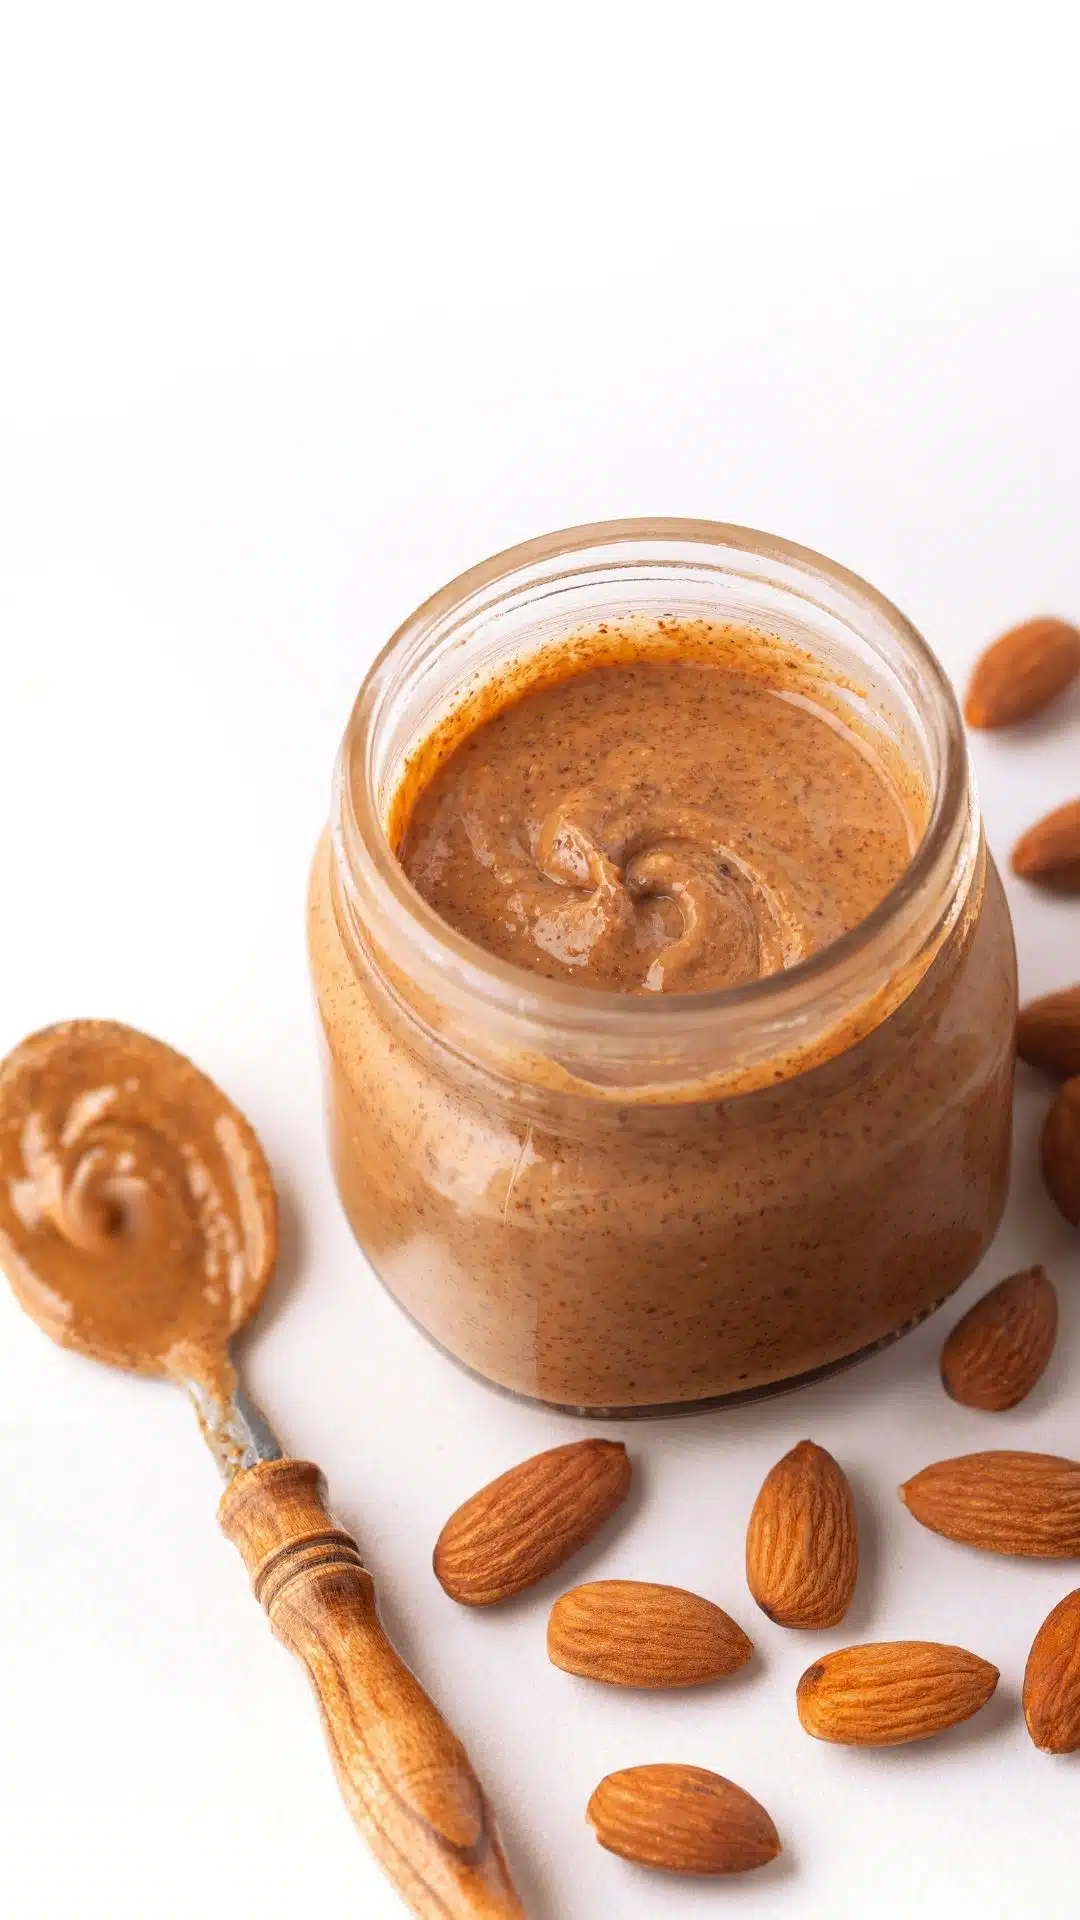 Looking down on a jar of almond butter sitting next to a spoon with almond butter on it. There are fresh almonds around the jar.